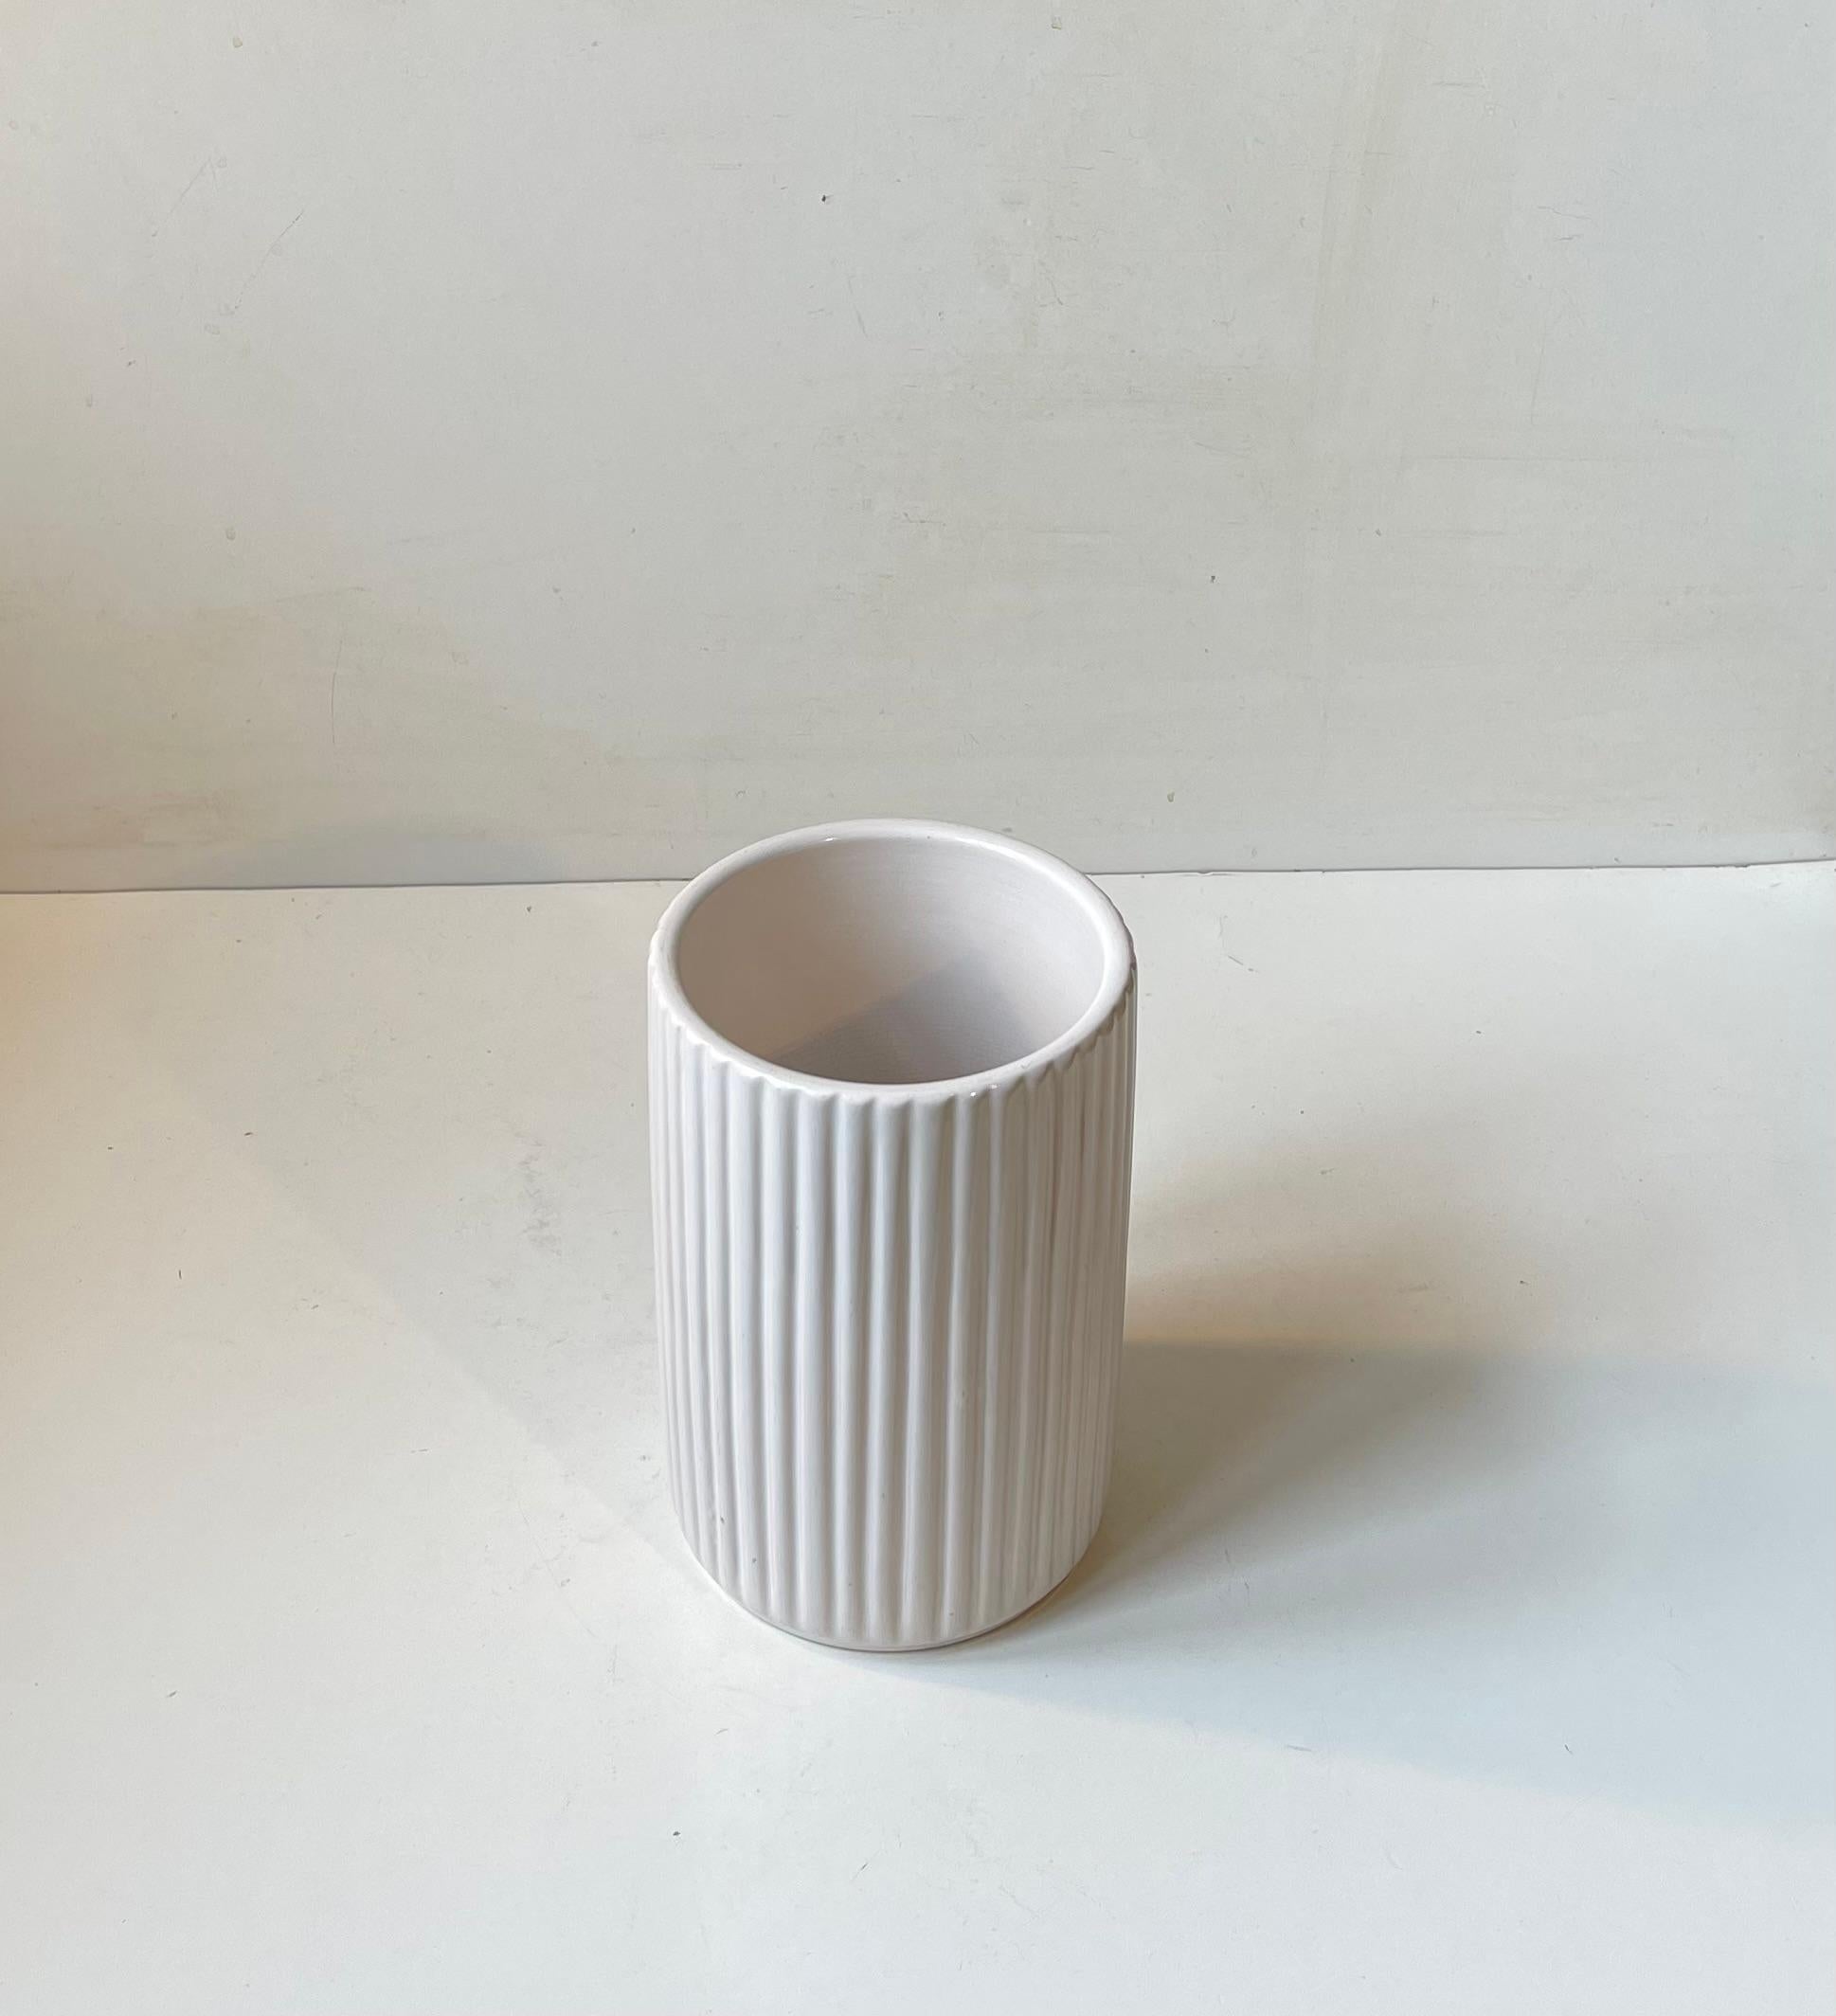 Art Deco Fluted Architectural Ceramic Vase in White Glaze by L. Hjorth, 1940s For Sale